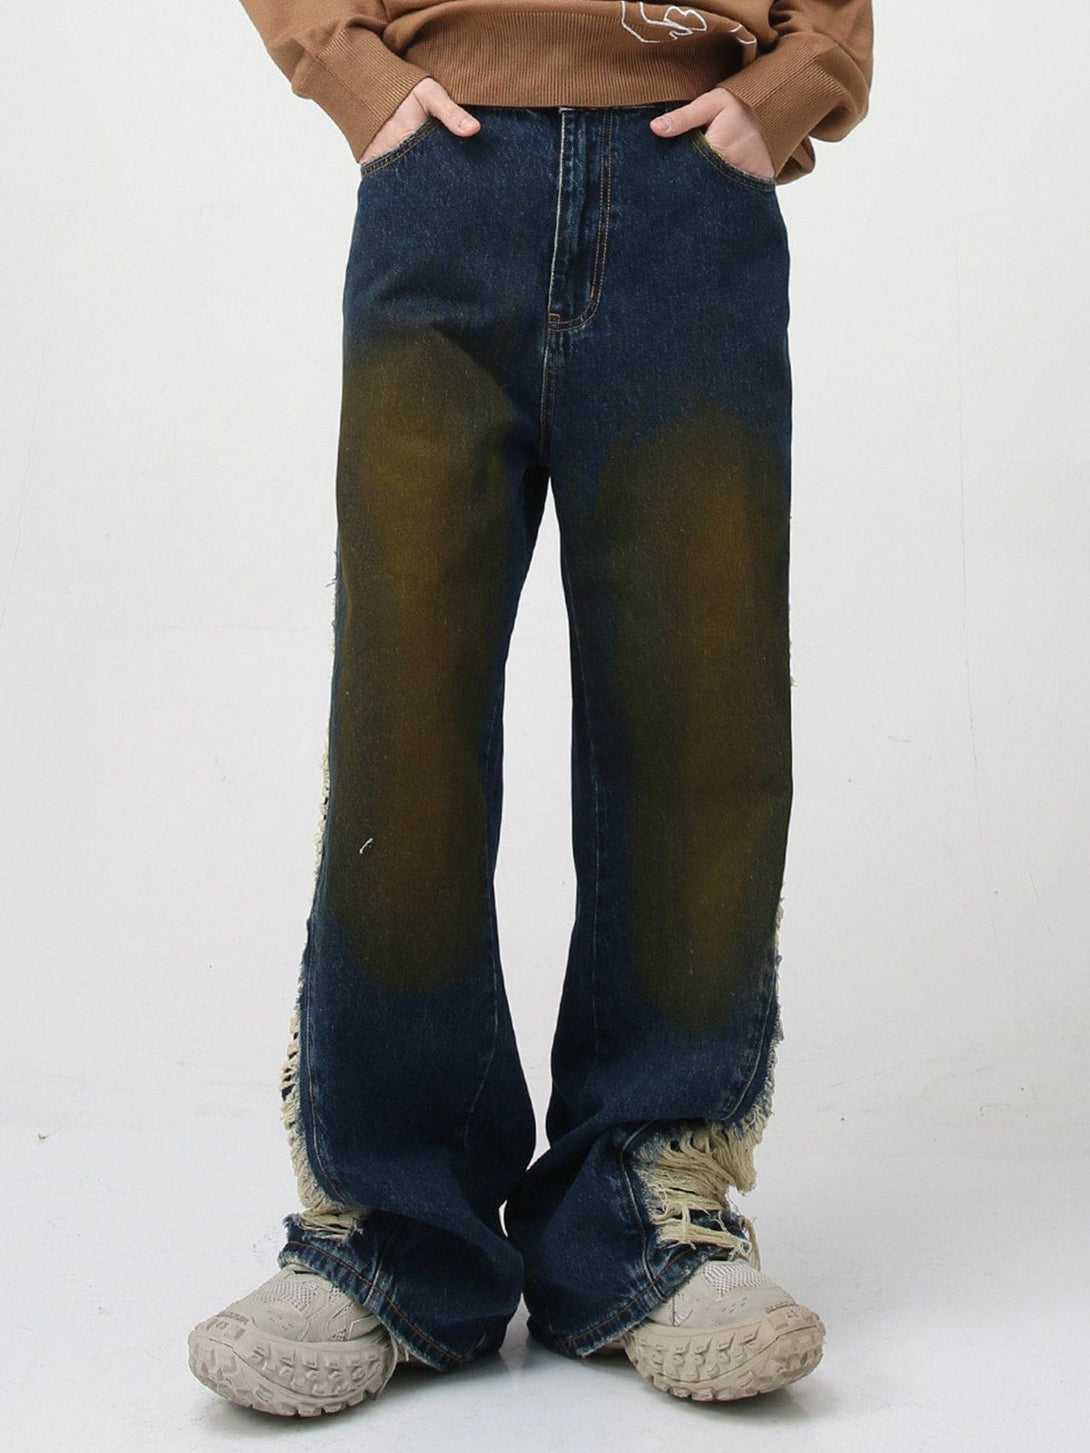 Levefly - Gradient Jeans - Streetwear Fashion - levefly.com